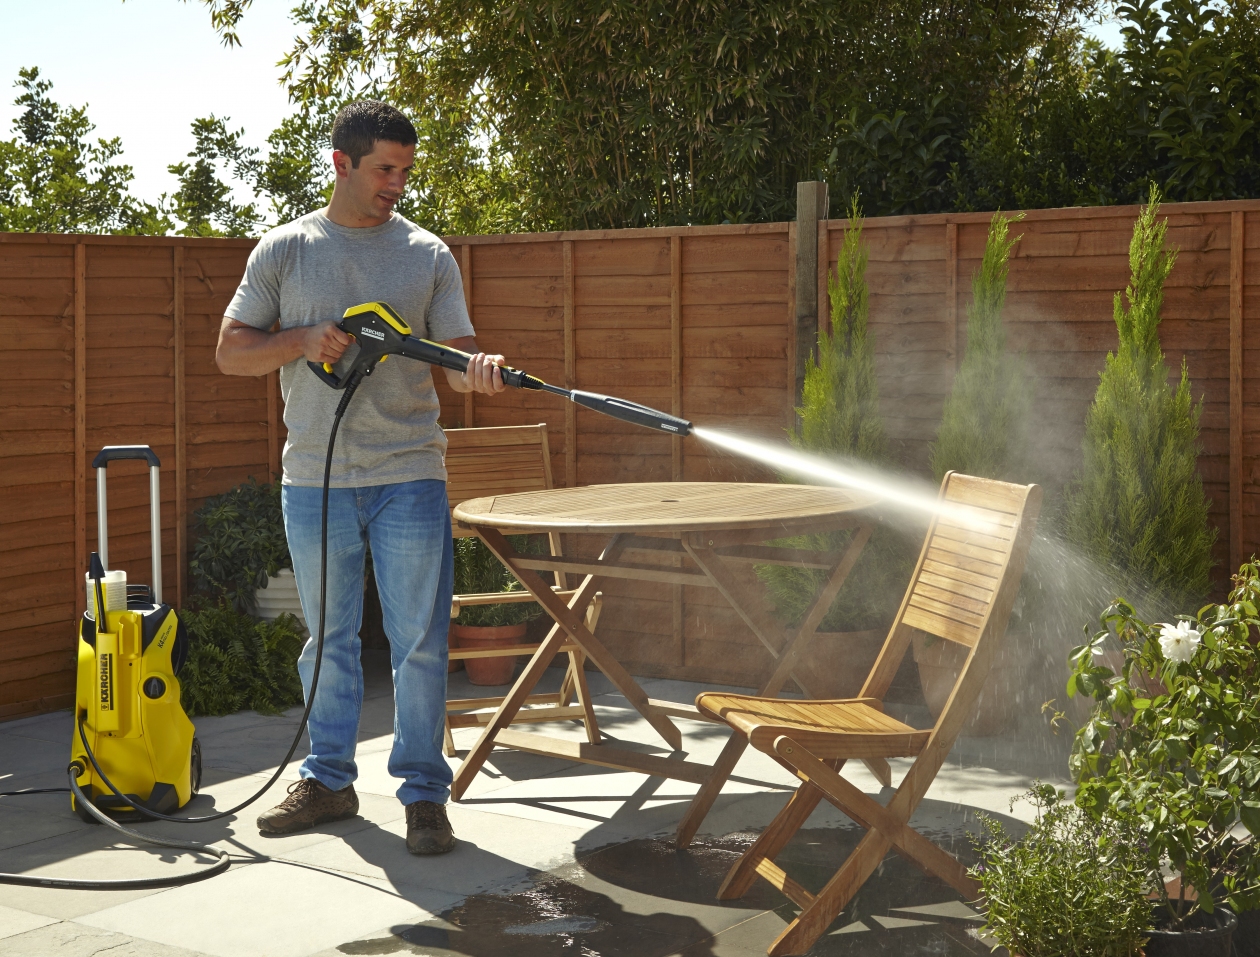 K4 Power Control Home Pressure Washer